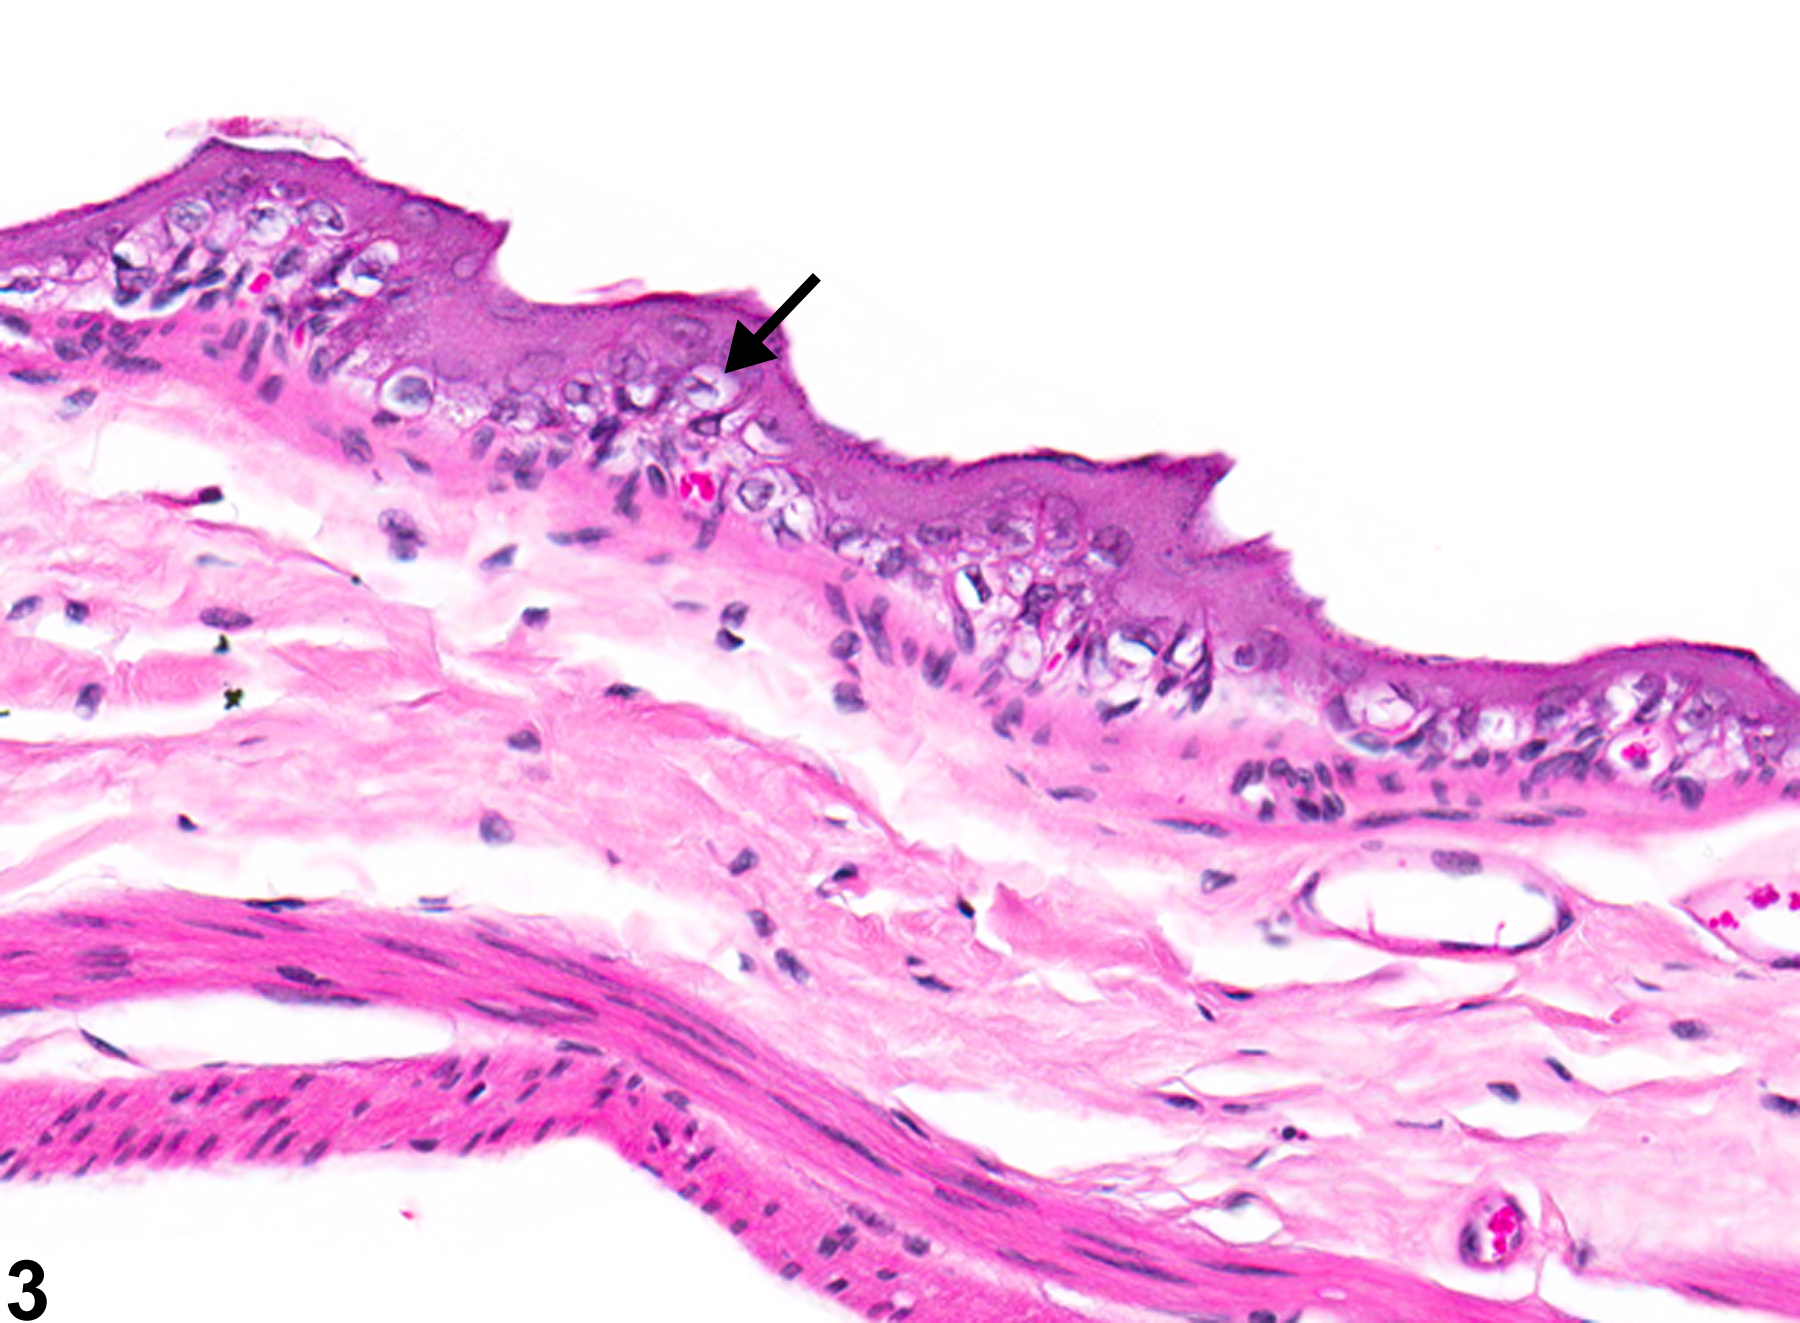 Image of degeneration in the forestomach epithelium from a male B6C3F1 mouse in a chronic study